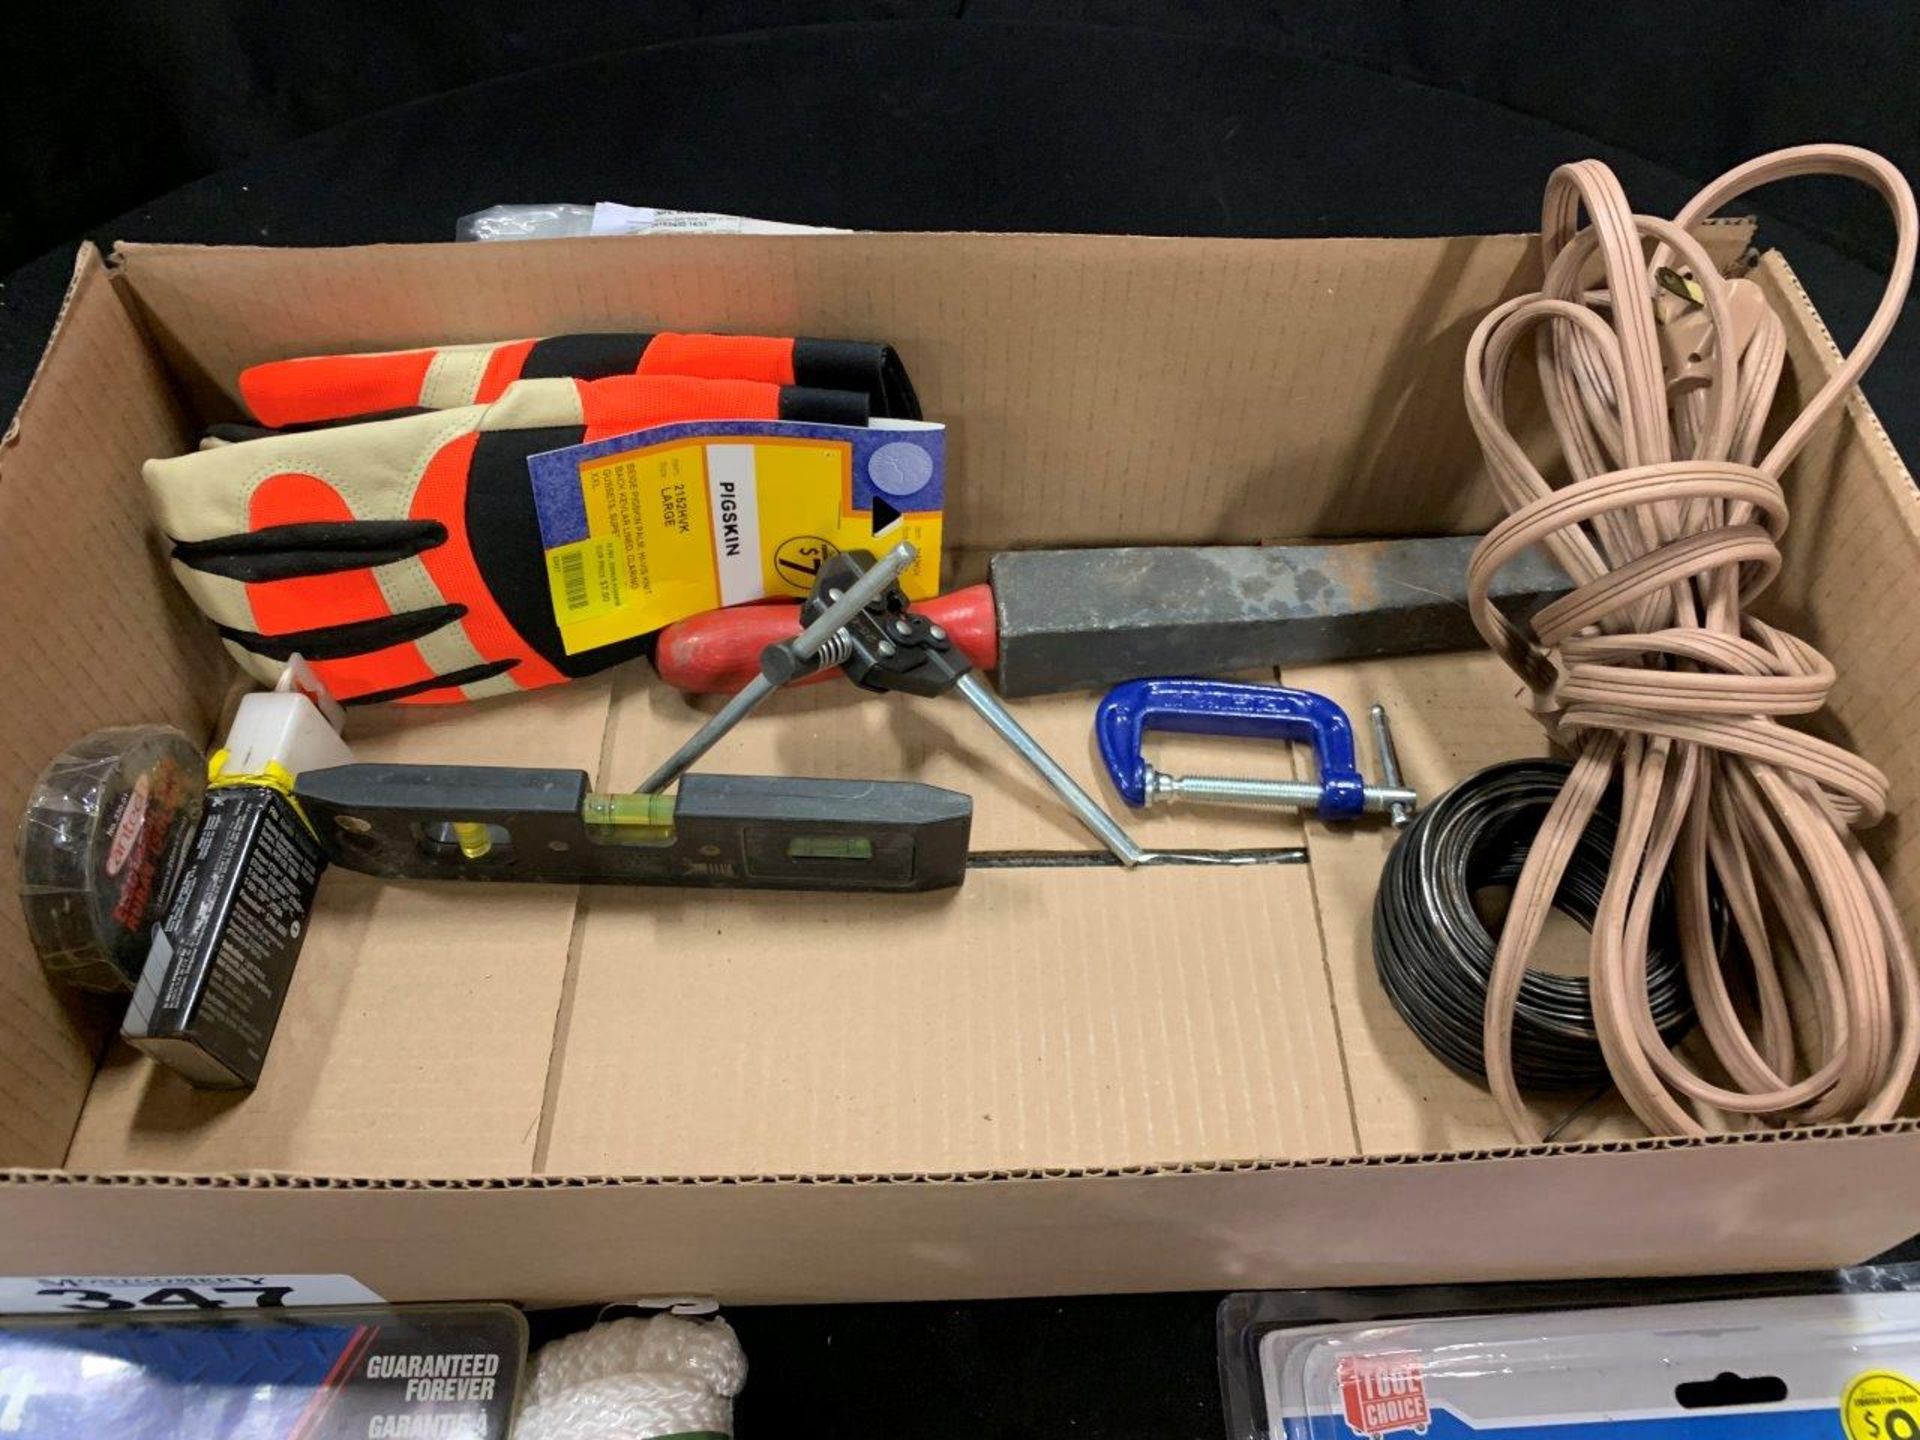 L/O ASSORTED HAND TOOLS, MASTERCRAFT ROBOGRIP, LPG TANK, C-CLAMPS, POLY ROPE, ETC. - Image 2 of 7